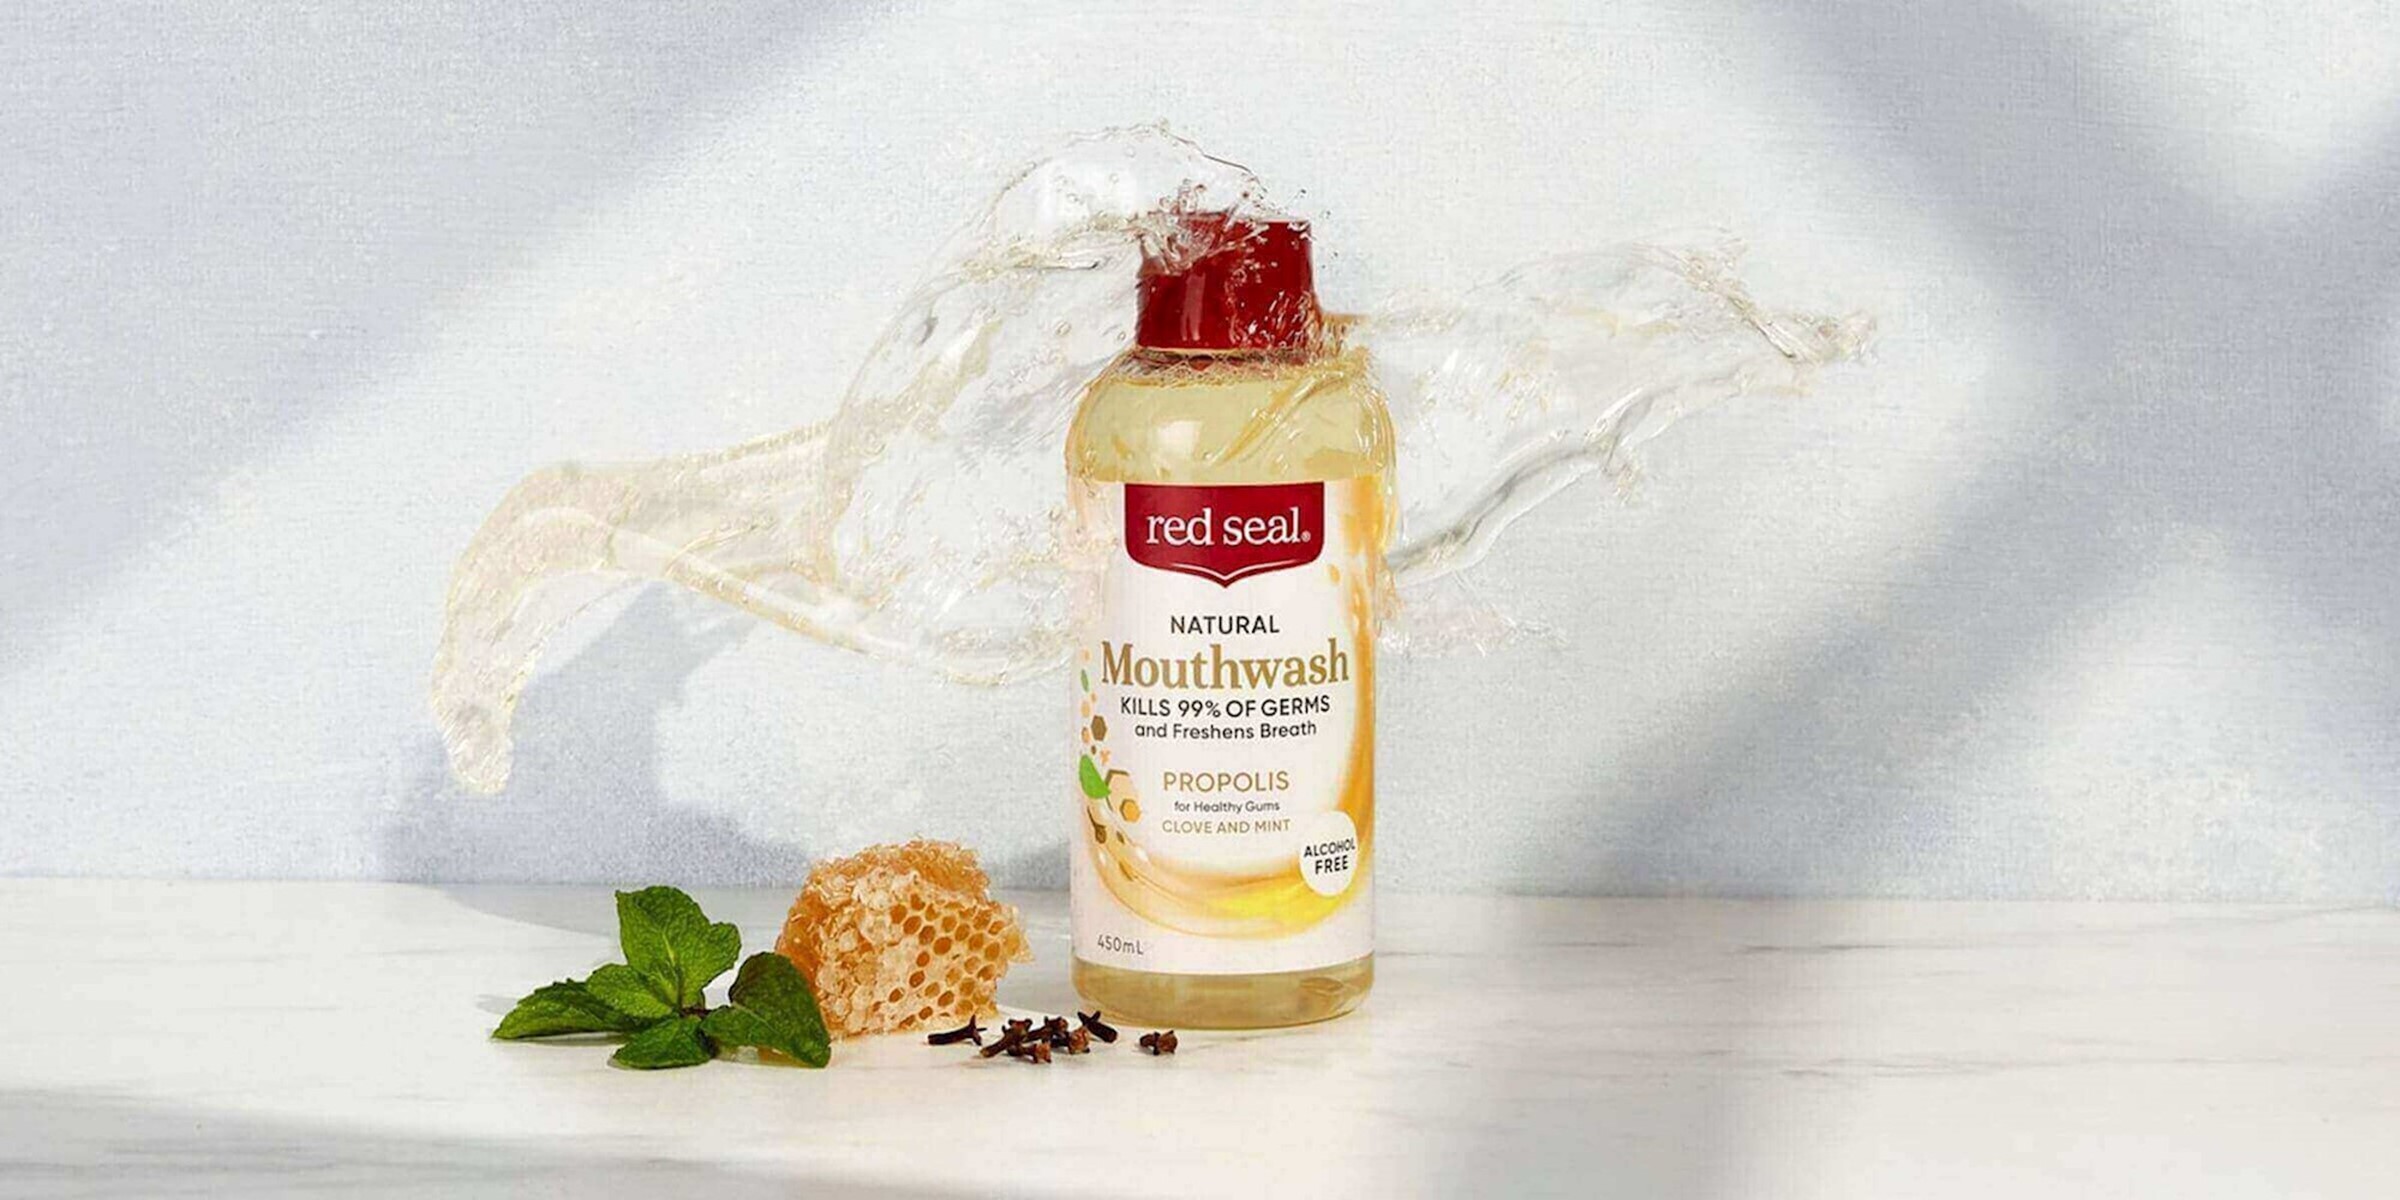 Red Seal Mouthwash Propolis Clove And Mint